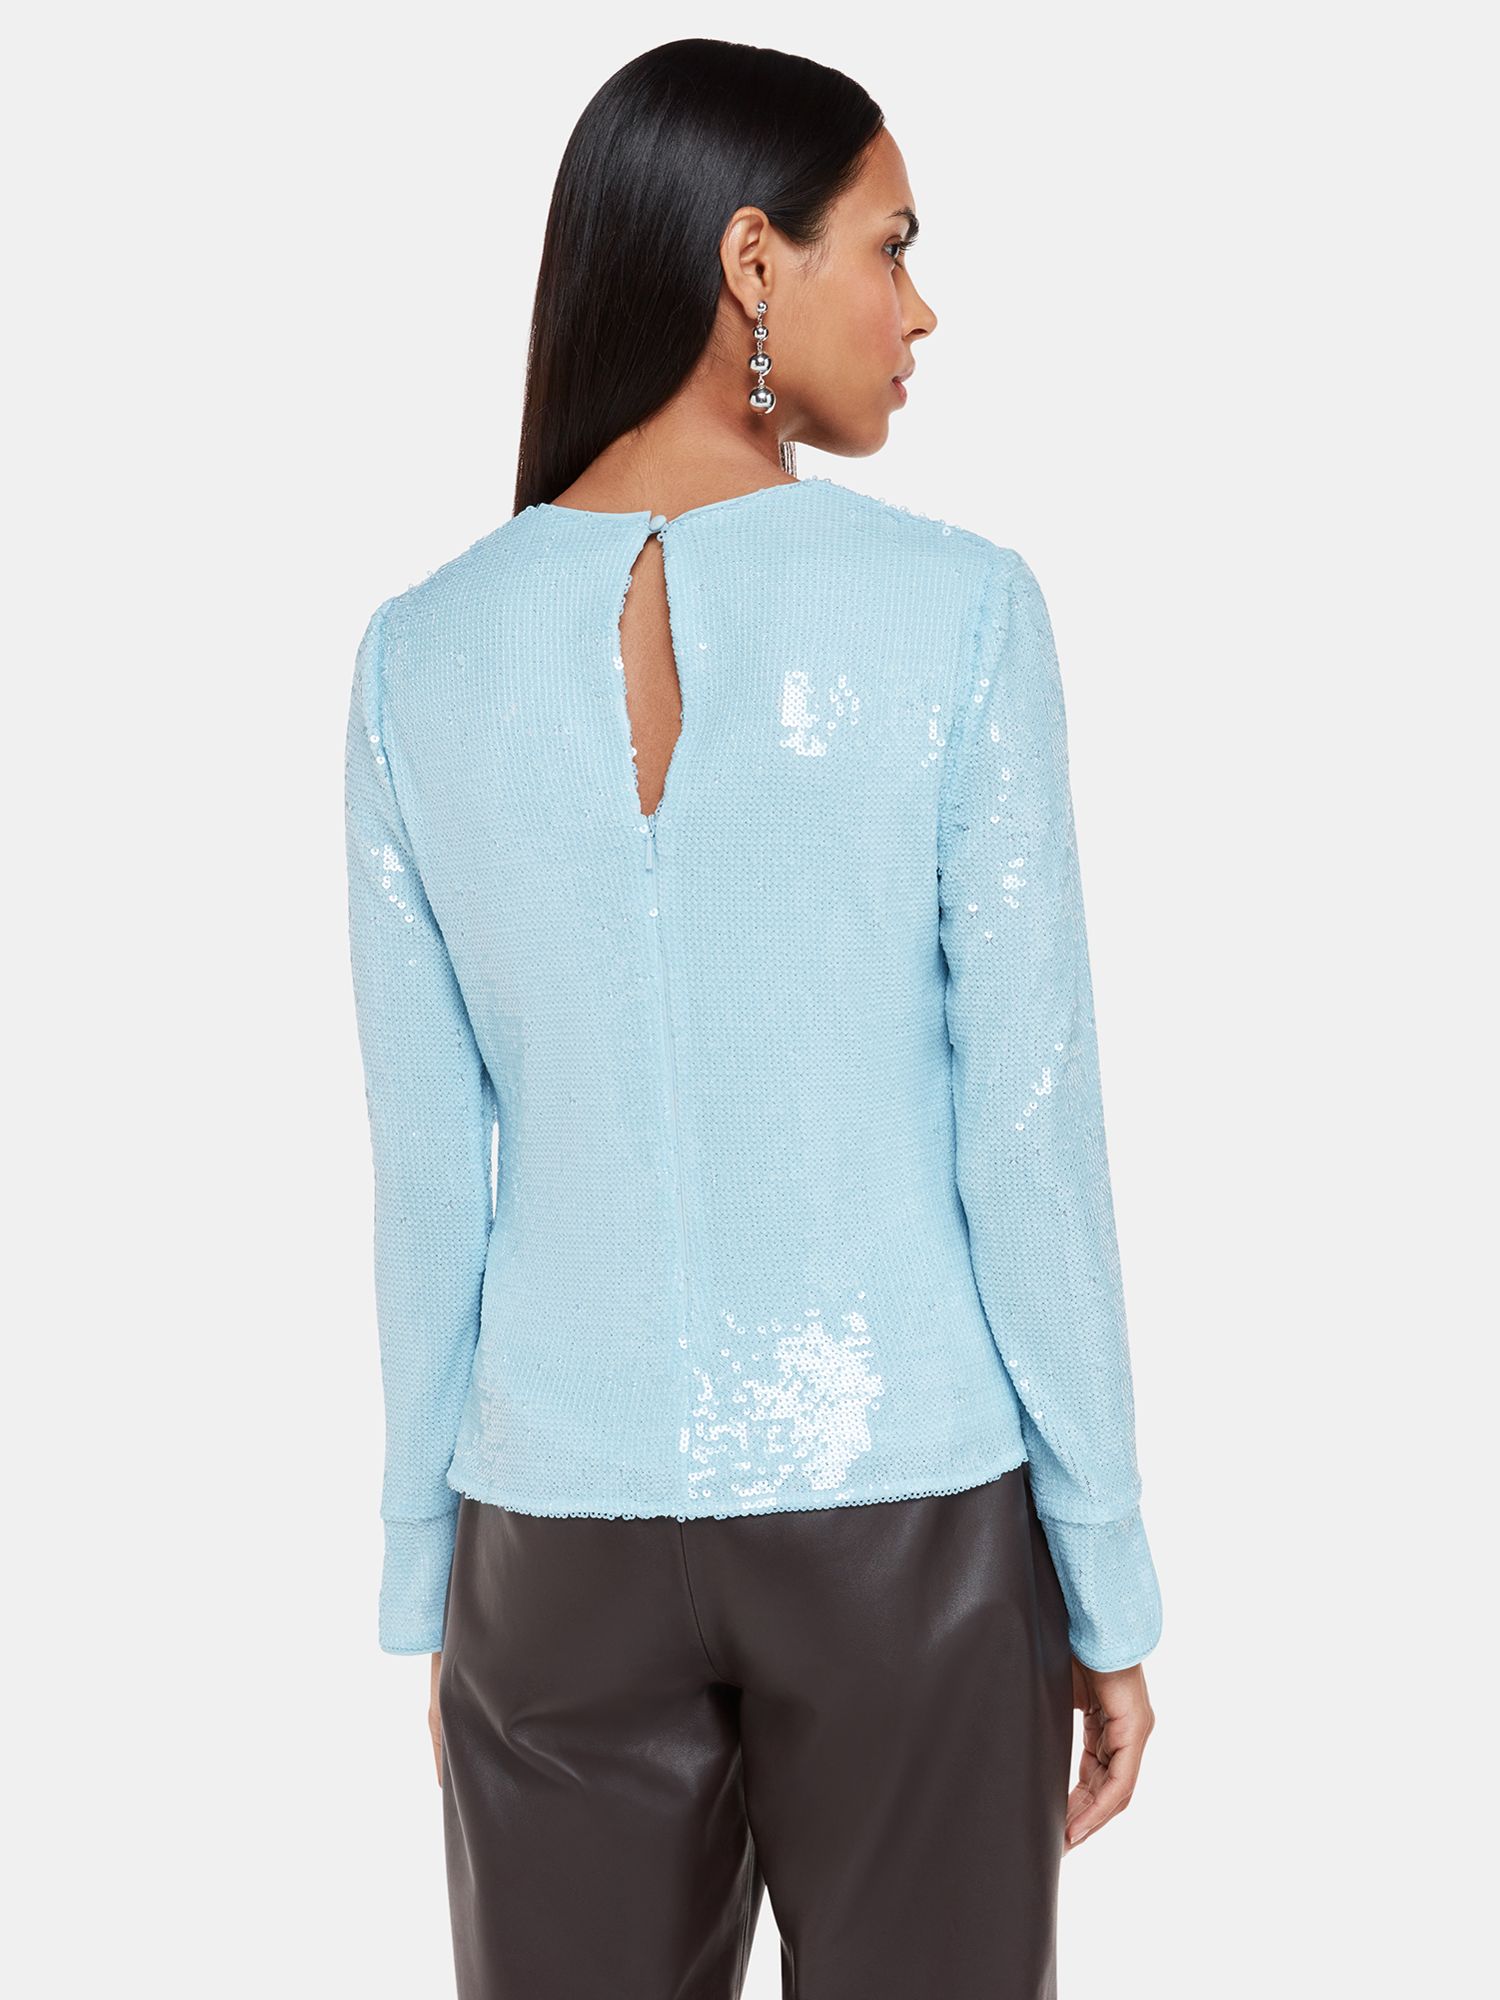 Whistles Minimal Sequin Top, Pale Blue, 10